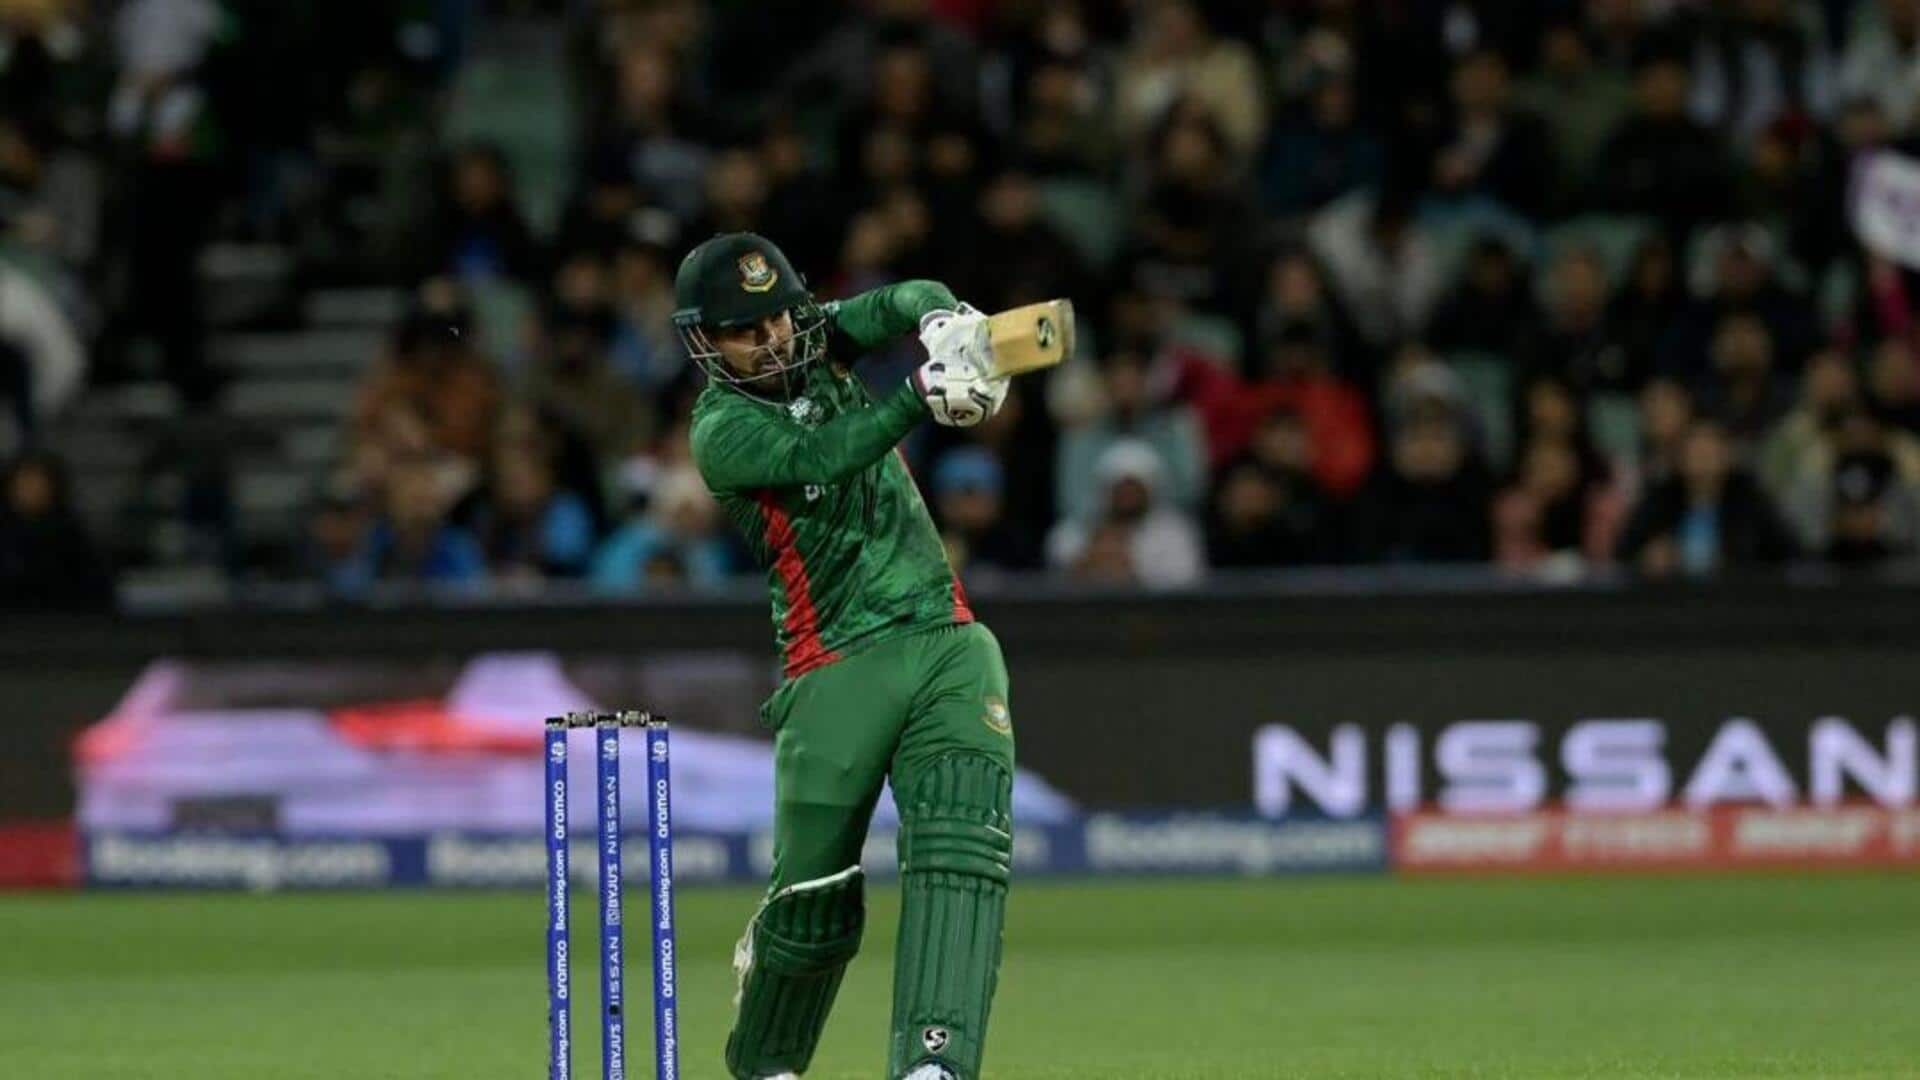 ICC World Cup: Litton Das hammers his 11th ODI fifty